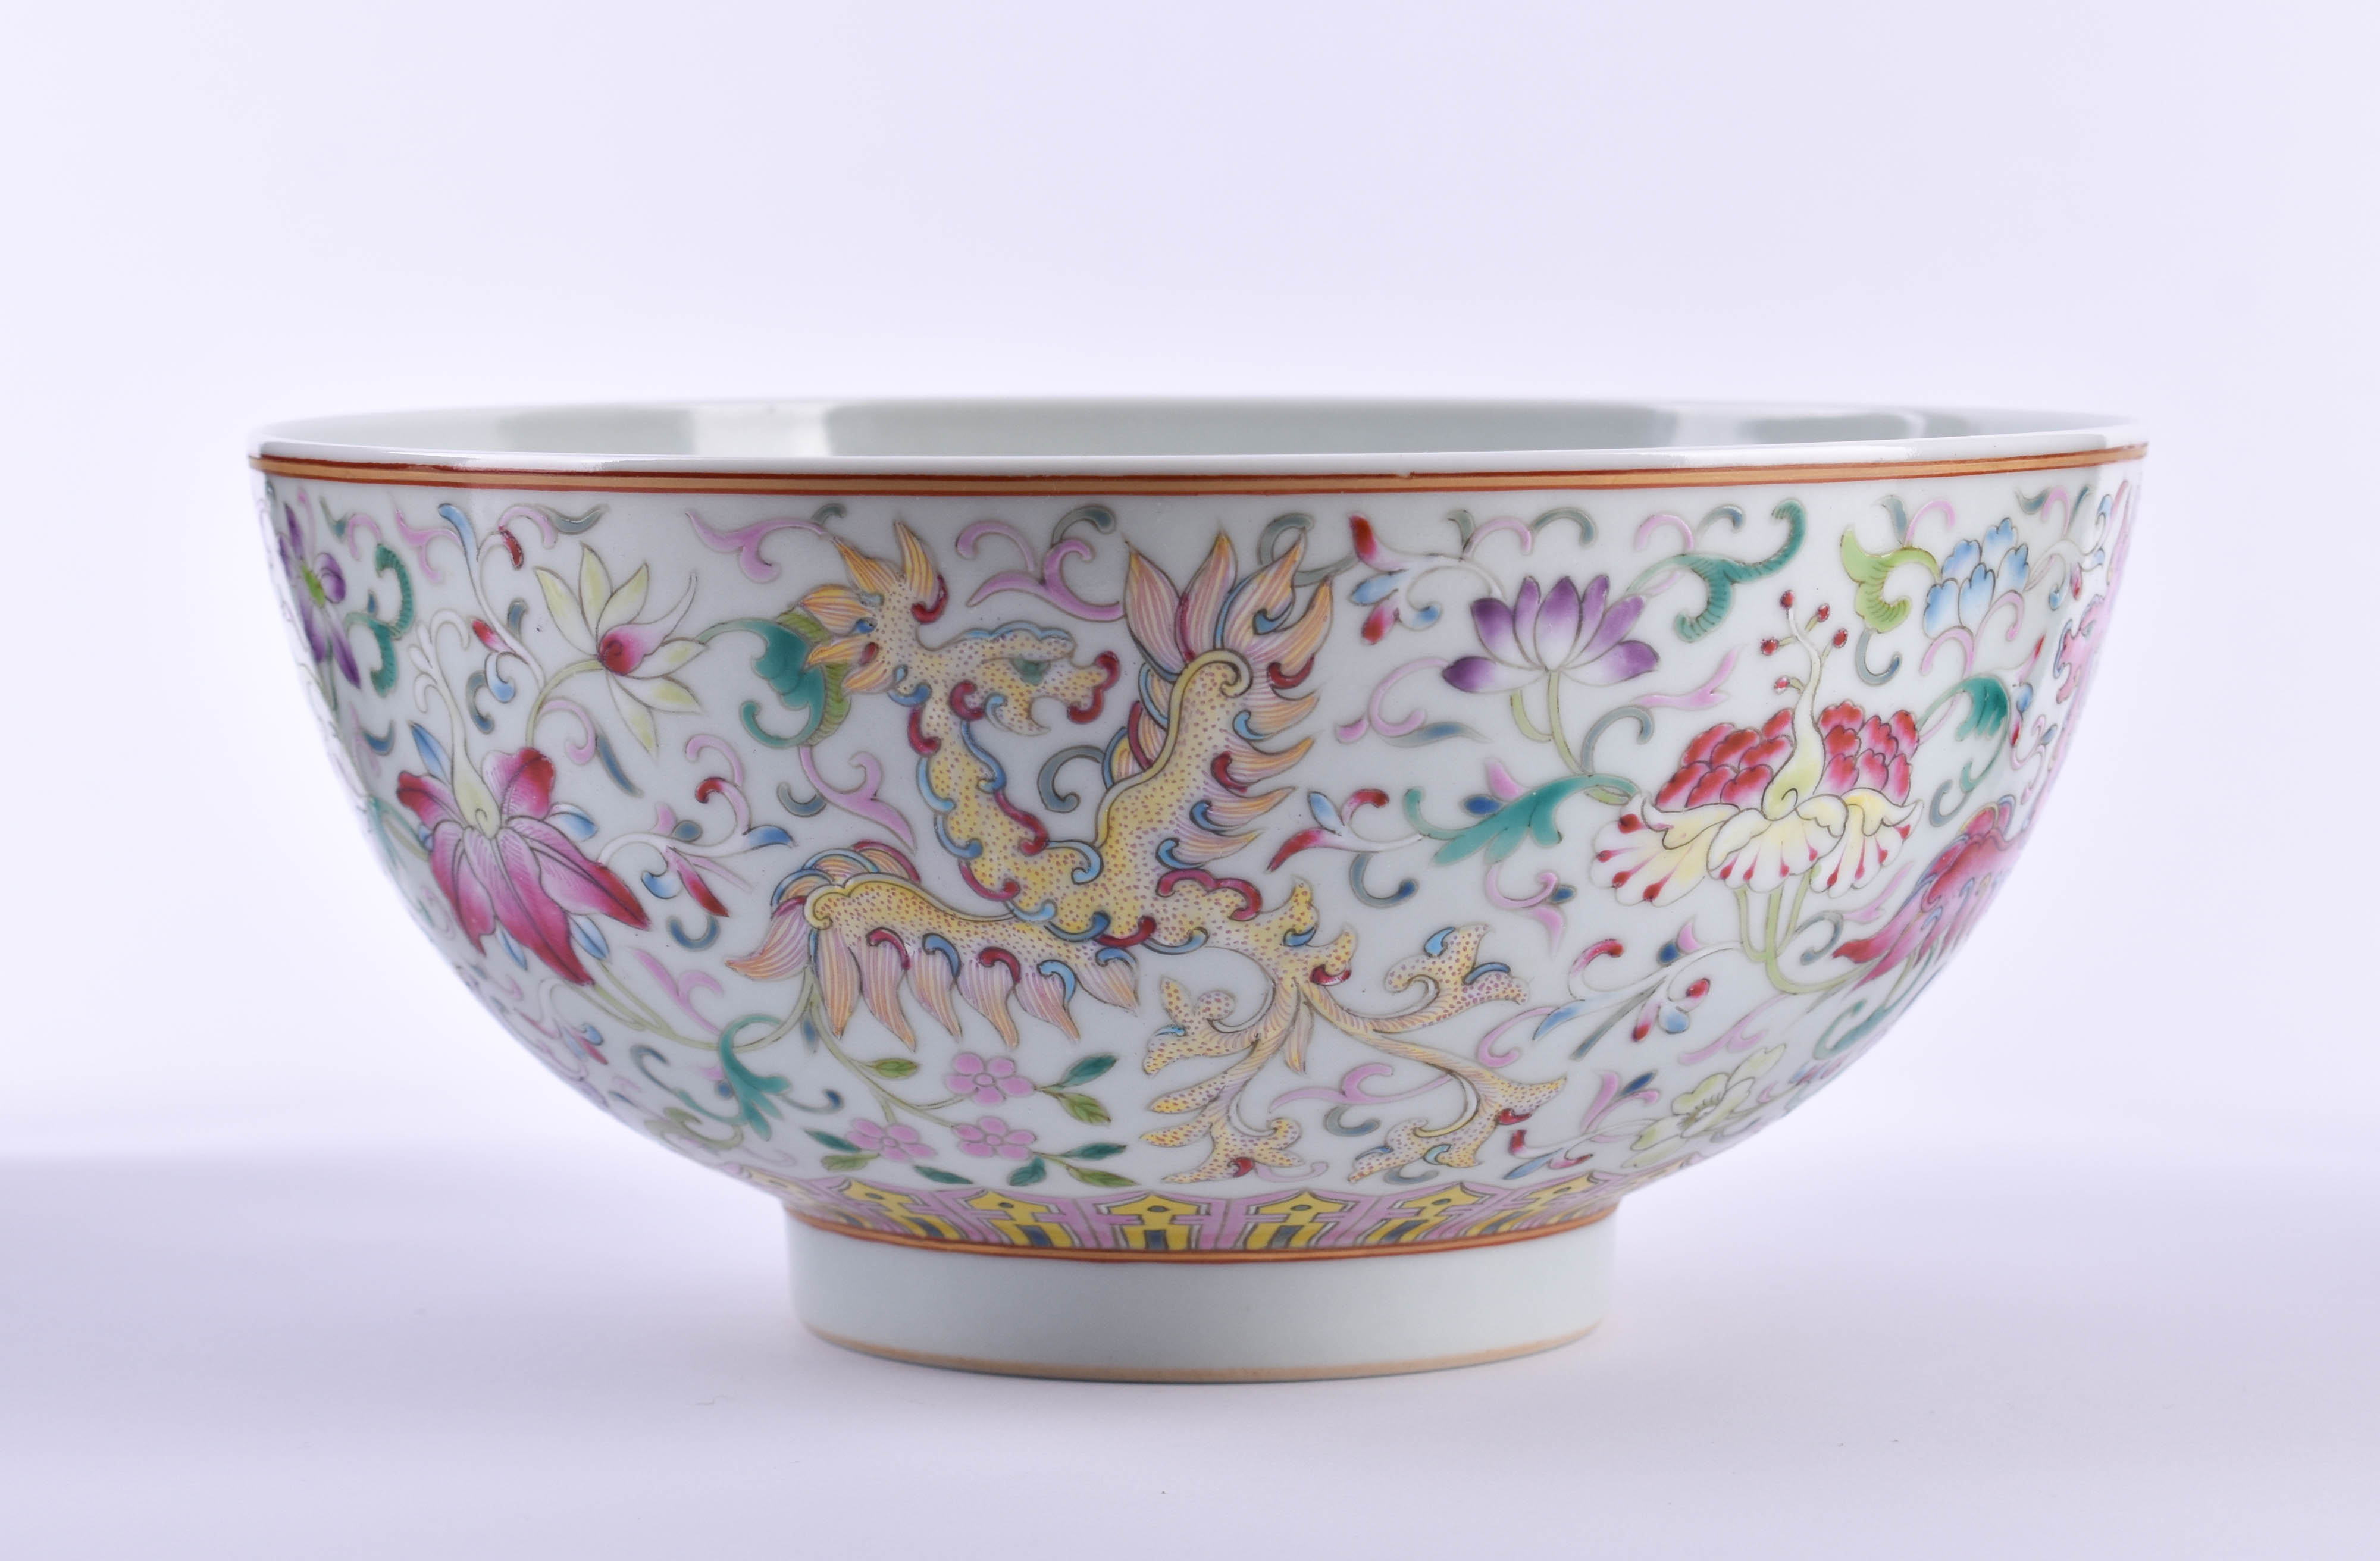  Famille Rose bowl China Qing dynasty - Image 3 of 10